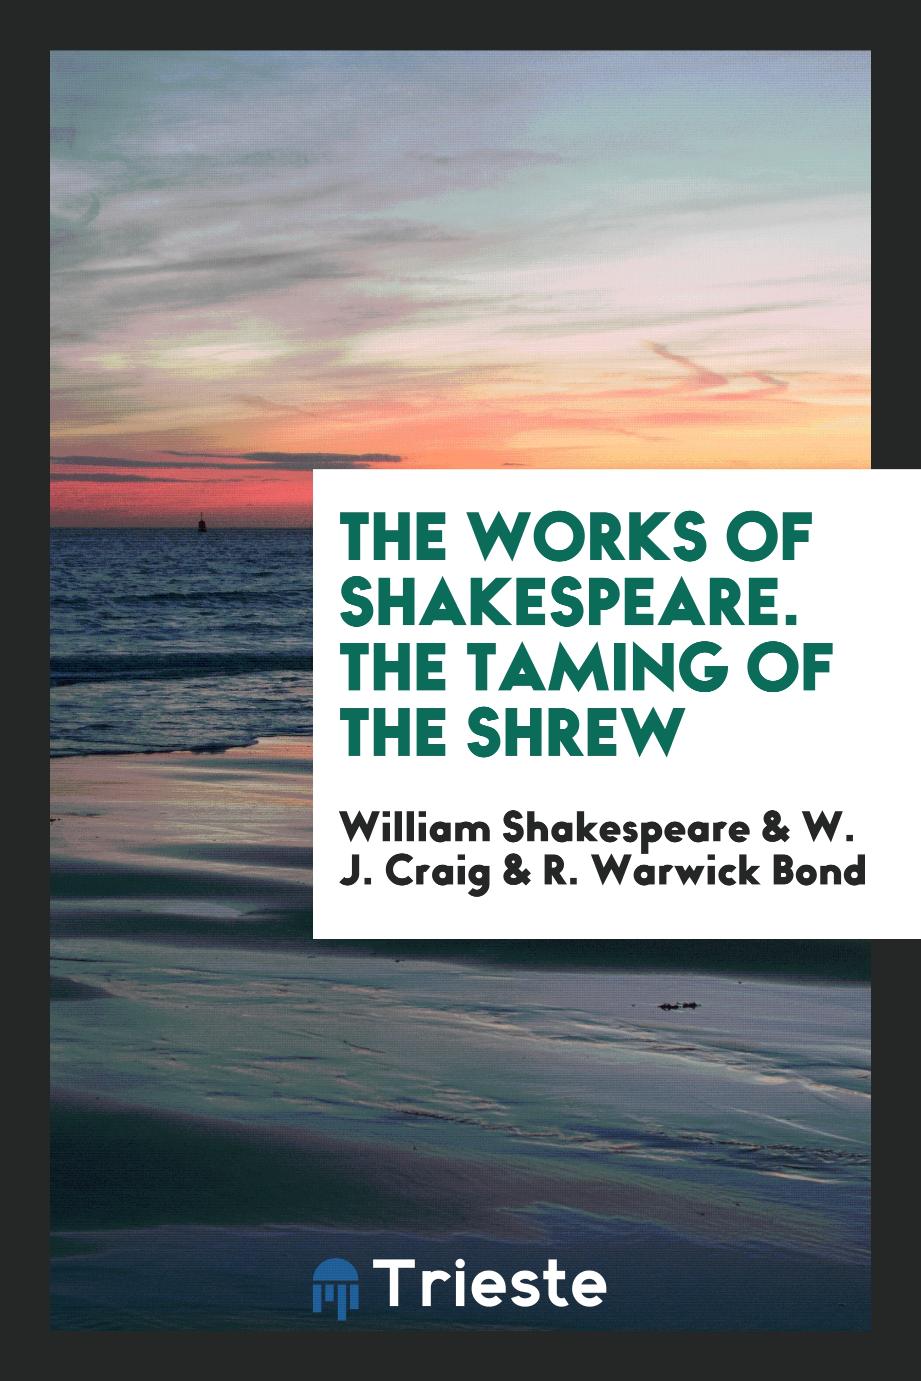 The Works of Shakespeare. The Taming of the Shrew